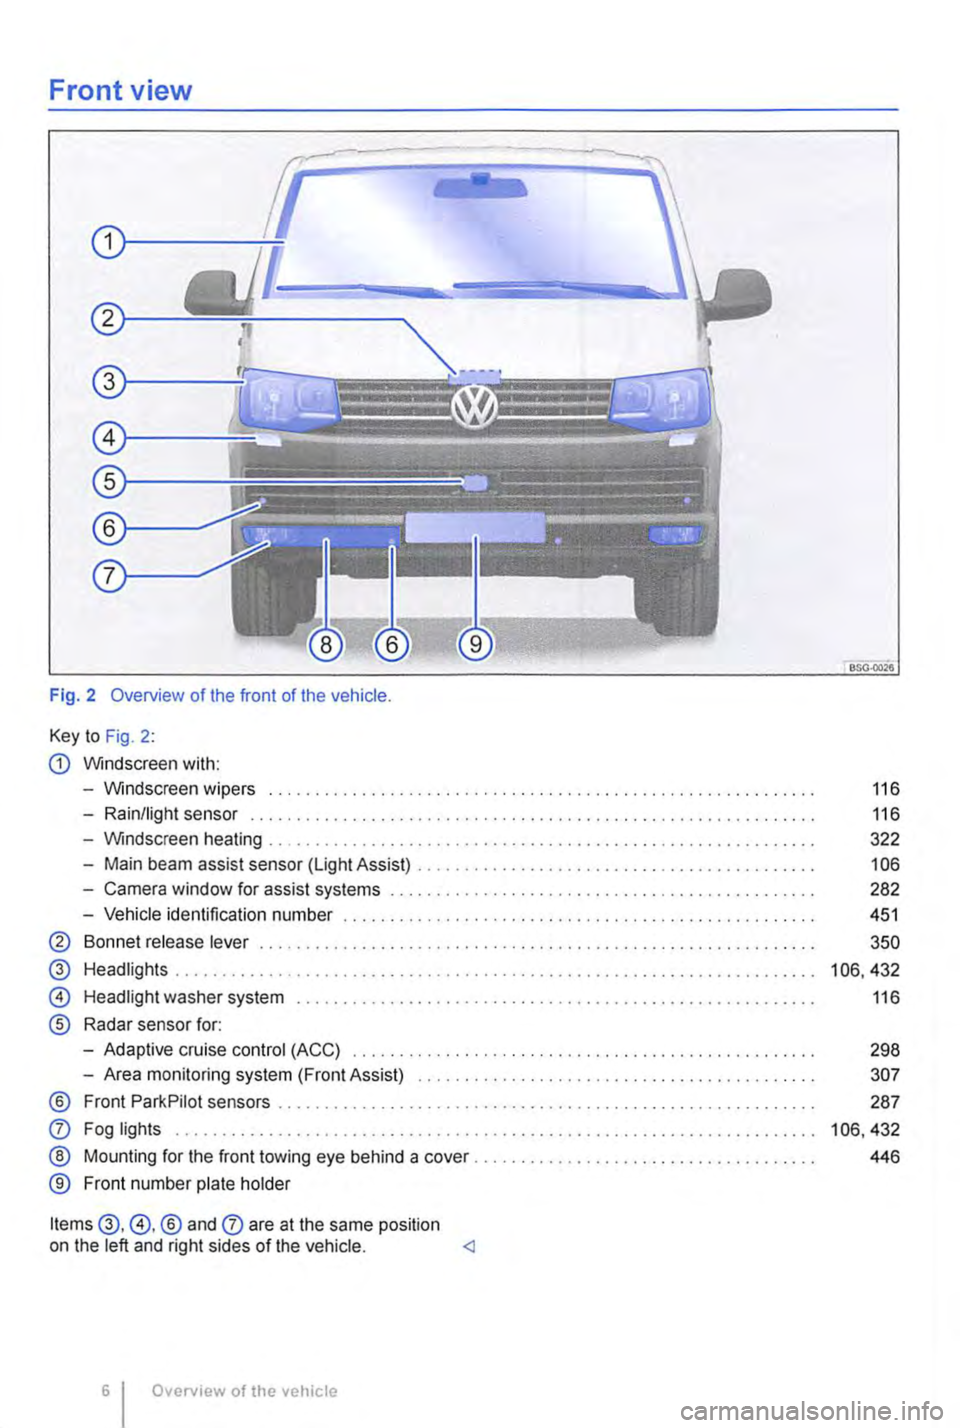 VOLKSWAGEN TRANSPORTER 2013  Owners Manual Front view 
Fig. 2 Overview of the front of the vehicle. 
Key to Fig. 2: 
G) Windscreen with: 
-Windscreen wipers .............. . 
-Rain/light sensor .............. . 
-Windscreen heating 
-Main beam